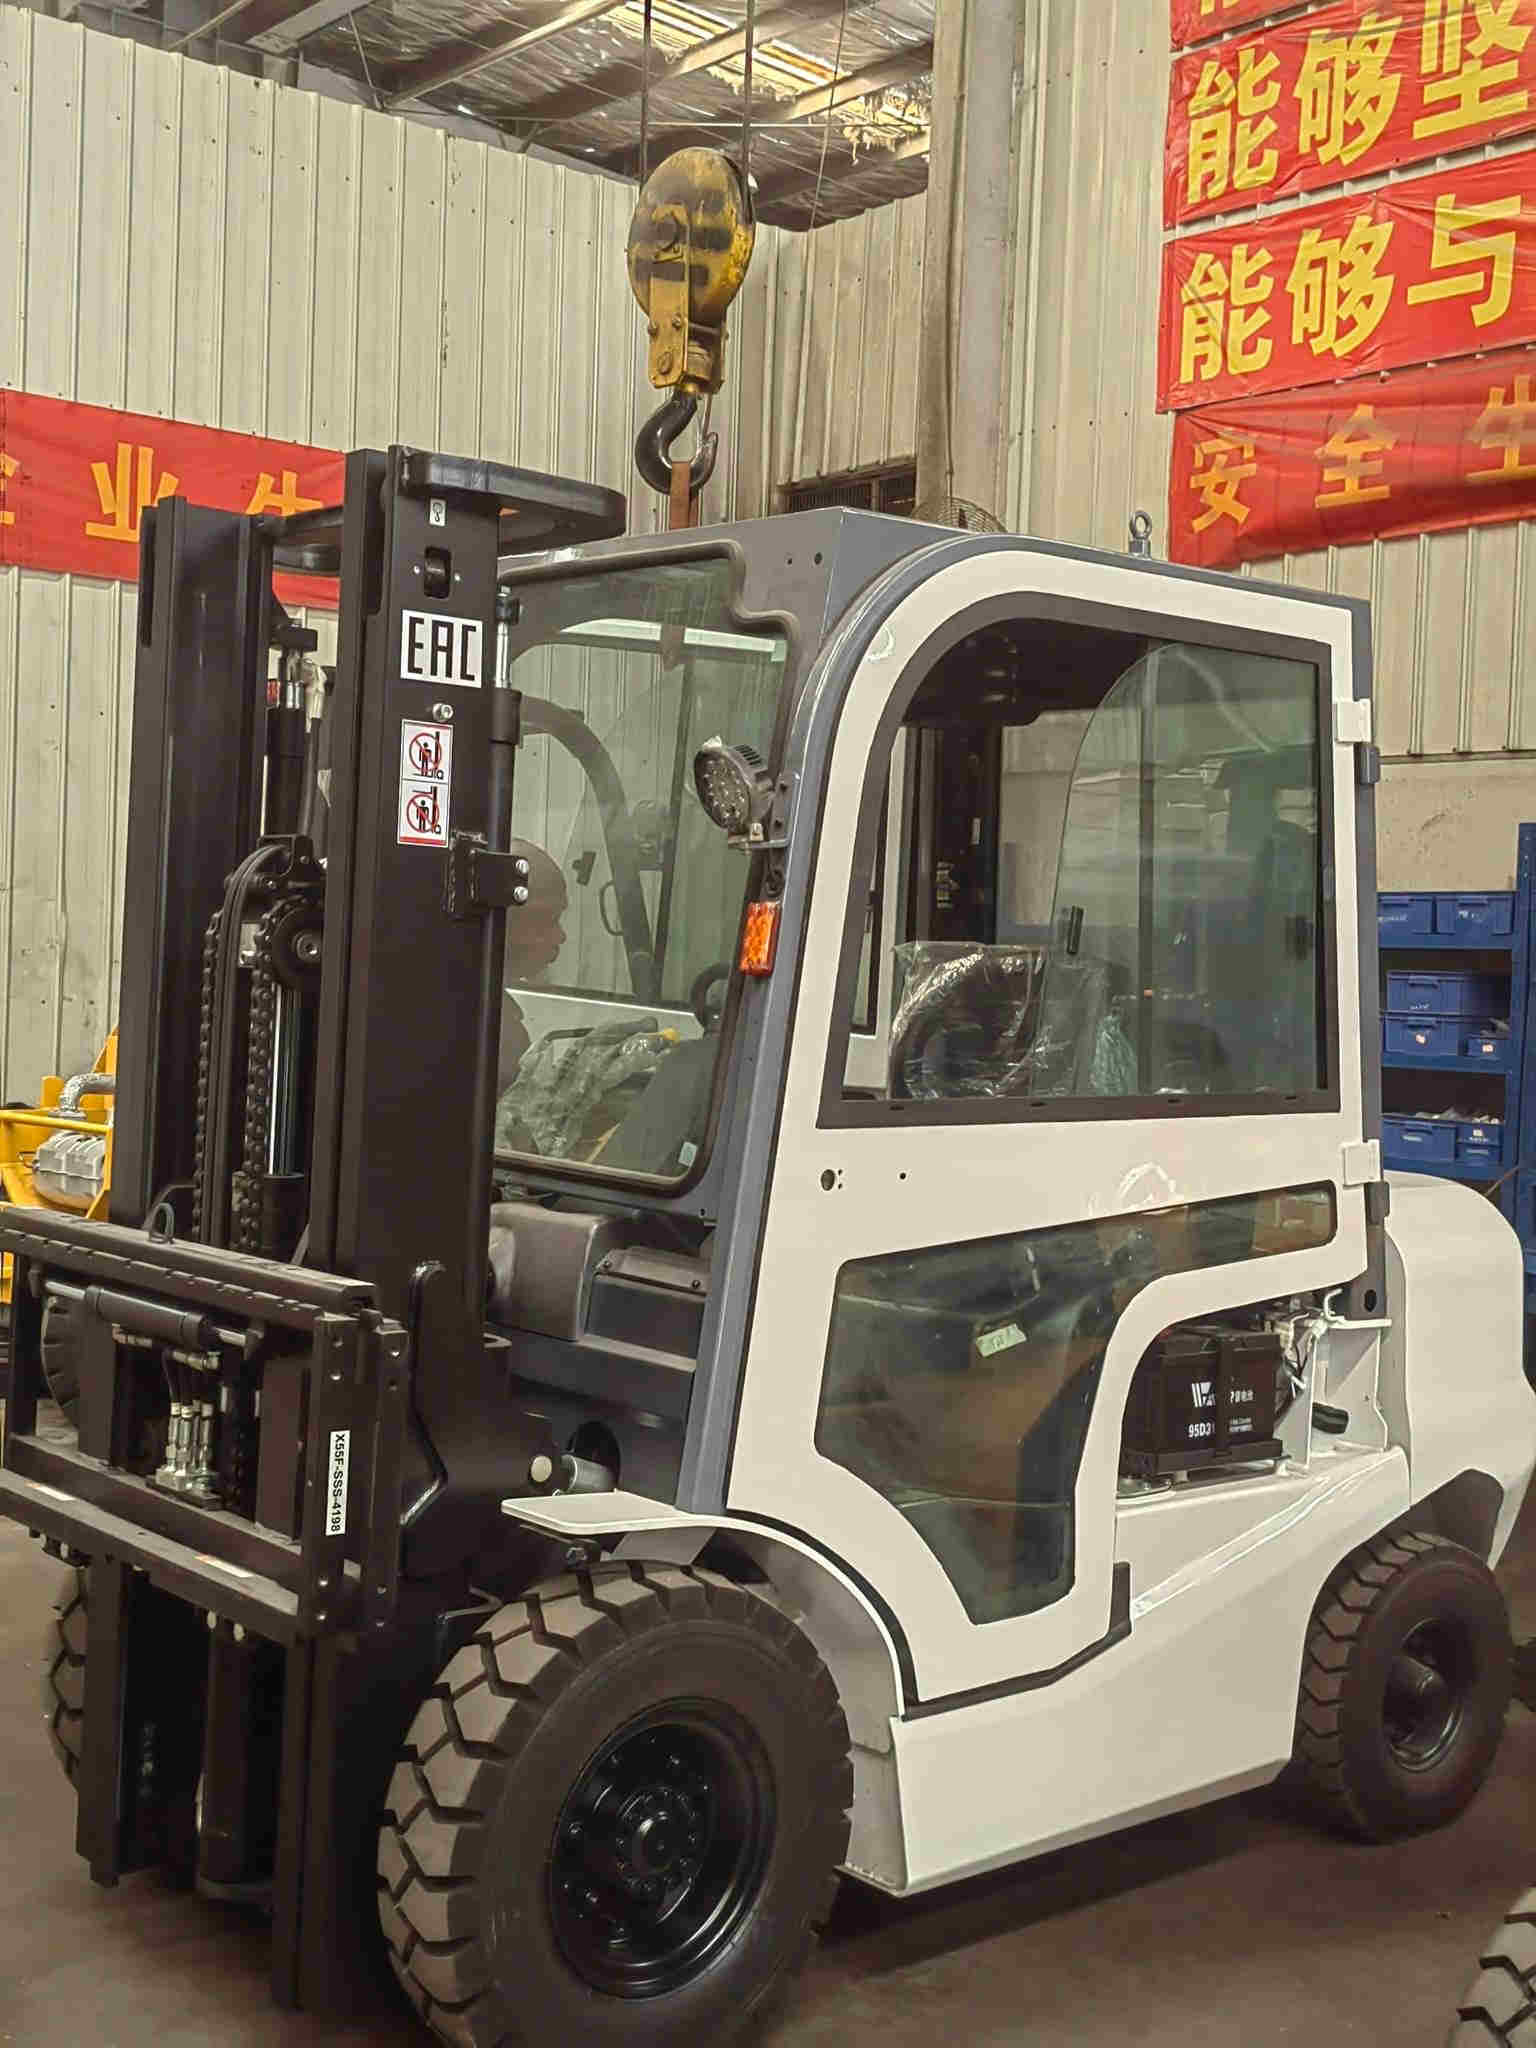 Differences between lead-acid and lithium electric forklifts